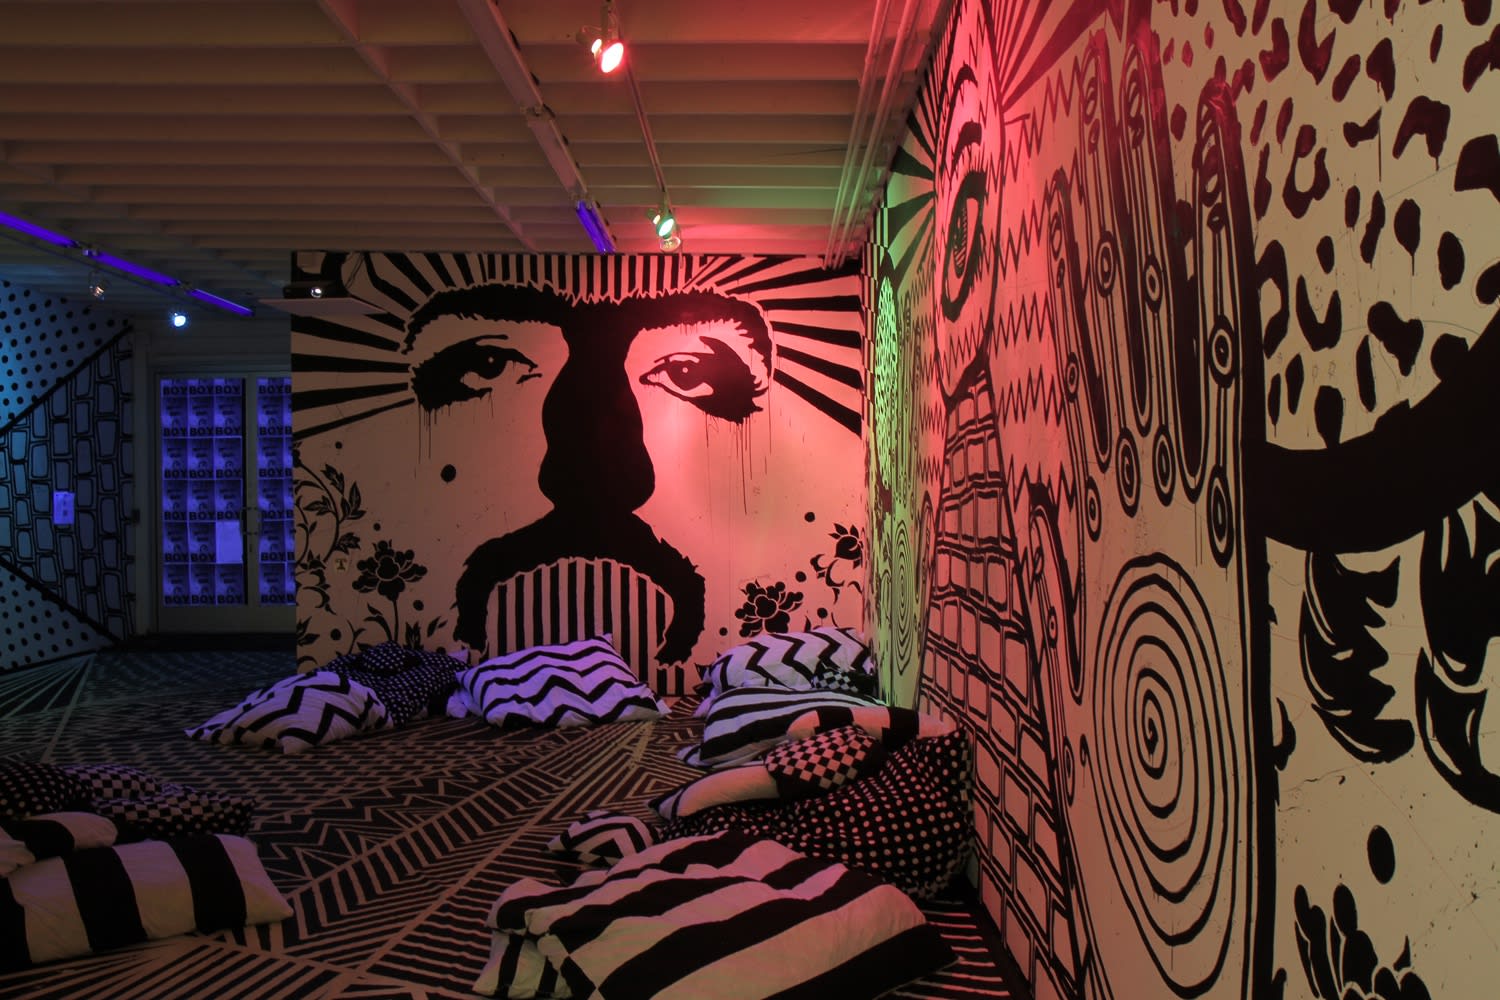 SSION BOY Installation View January 16 – April 23, 2010 Peres Projects, Los Angeles